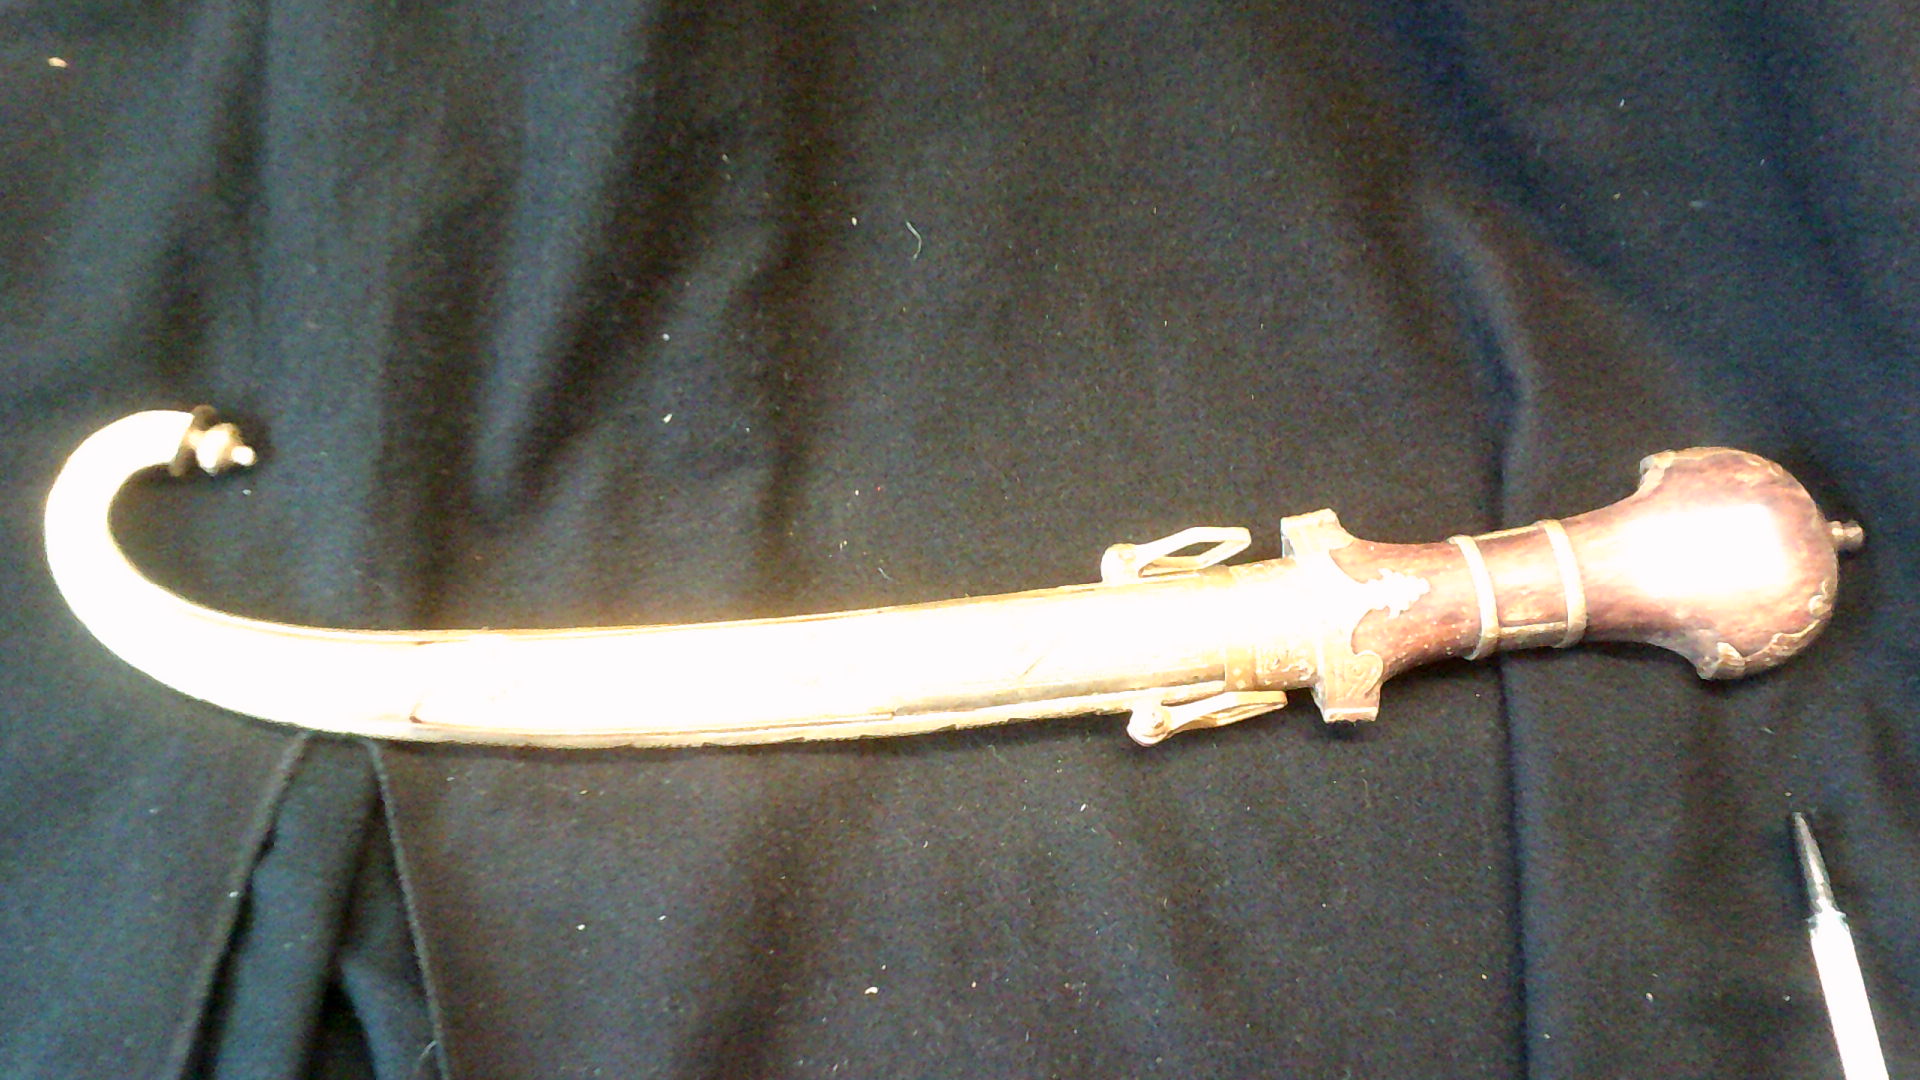 Dagger-Ceremonial Brass, wood and bone dagger, approx. 20 inches in total steel blade.